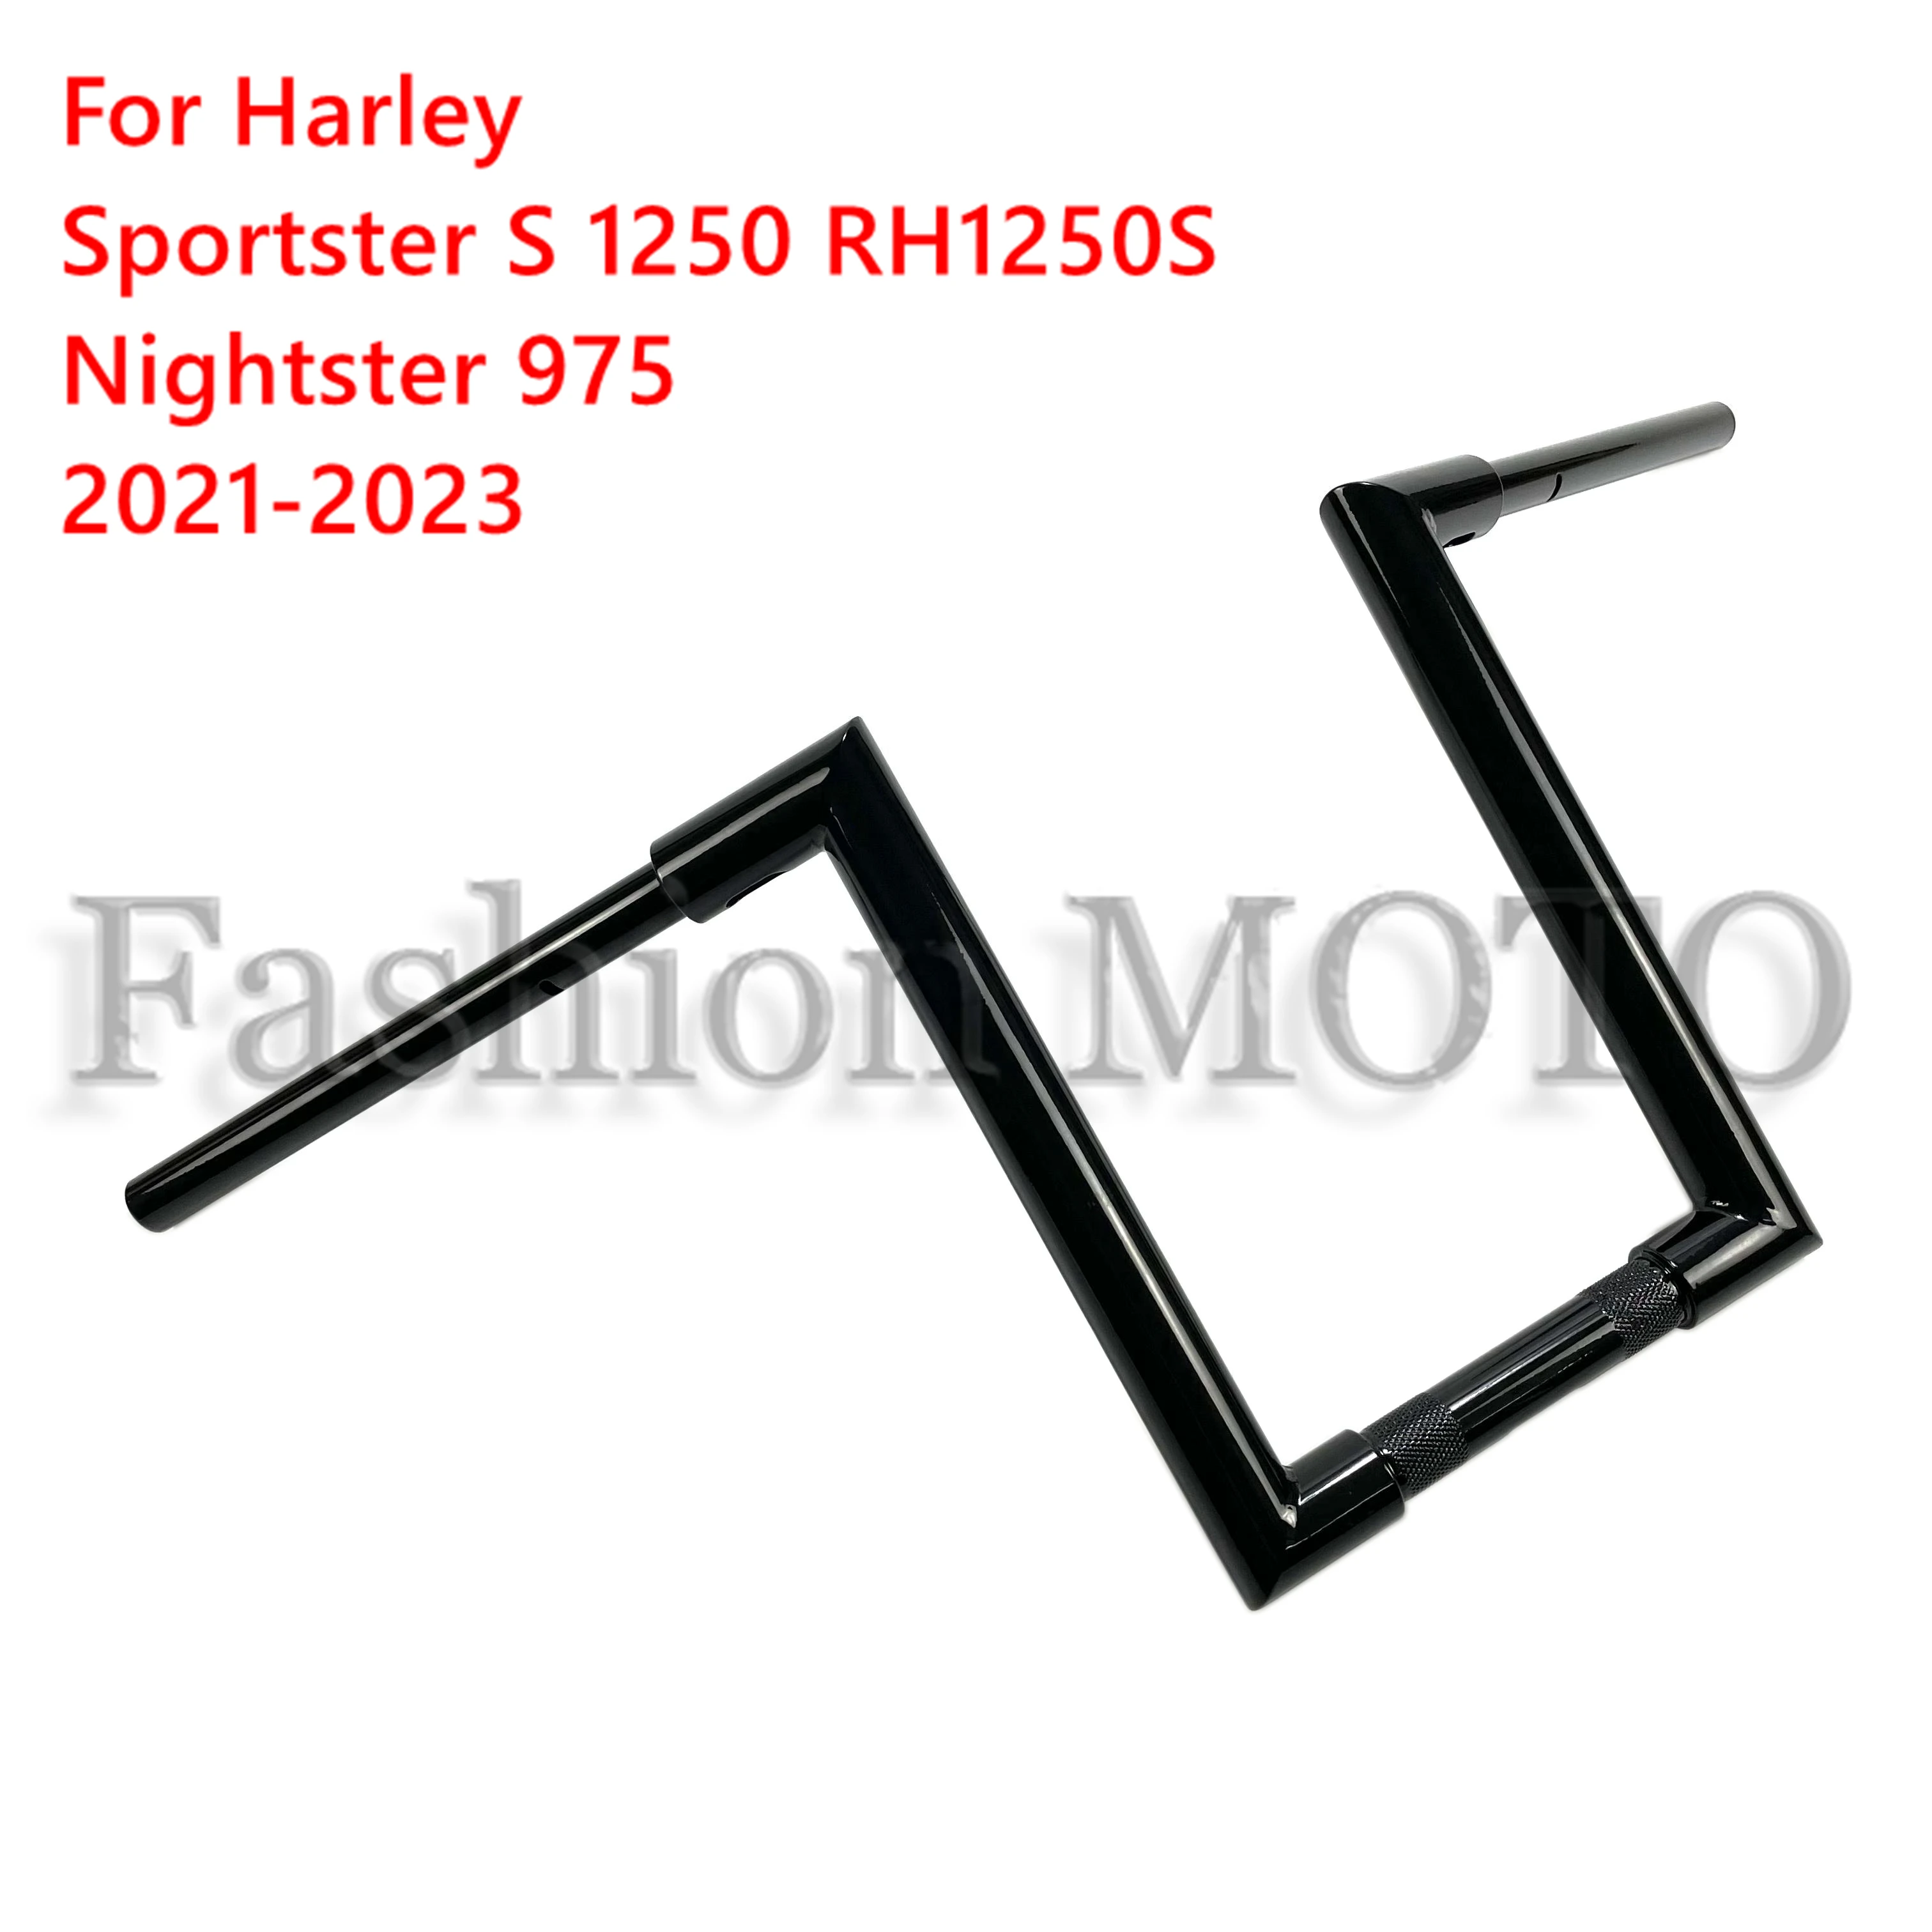 

Motorcycle 1-1/4 inch Handlebar Bar 7/8'' 22mm Right Angle Bar For Harley Sportster S 1250 RH1250S Nightster 975 2021-2023